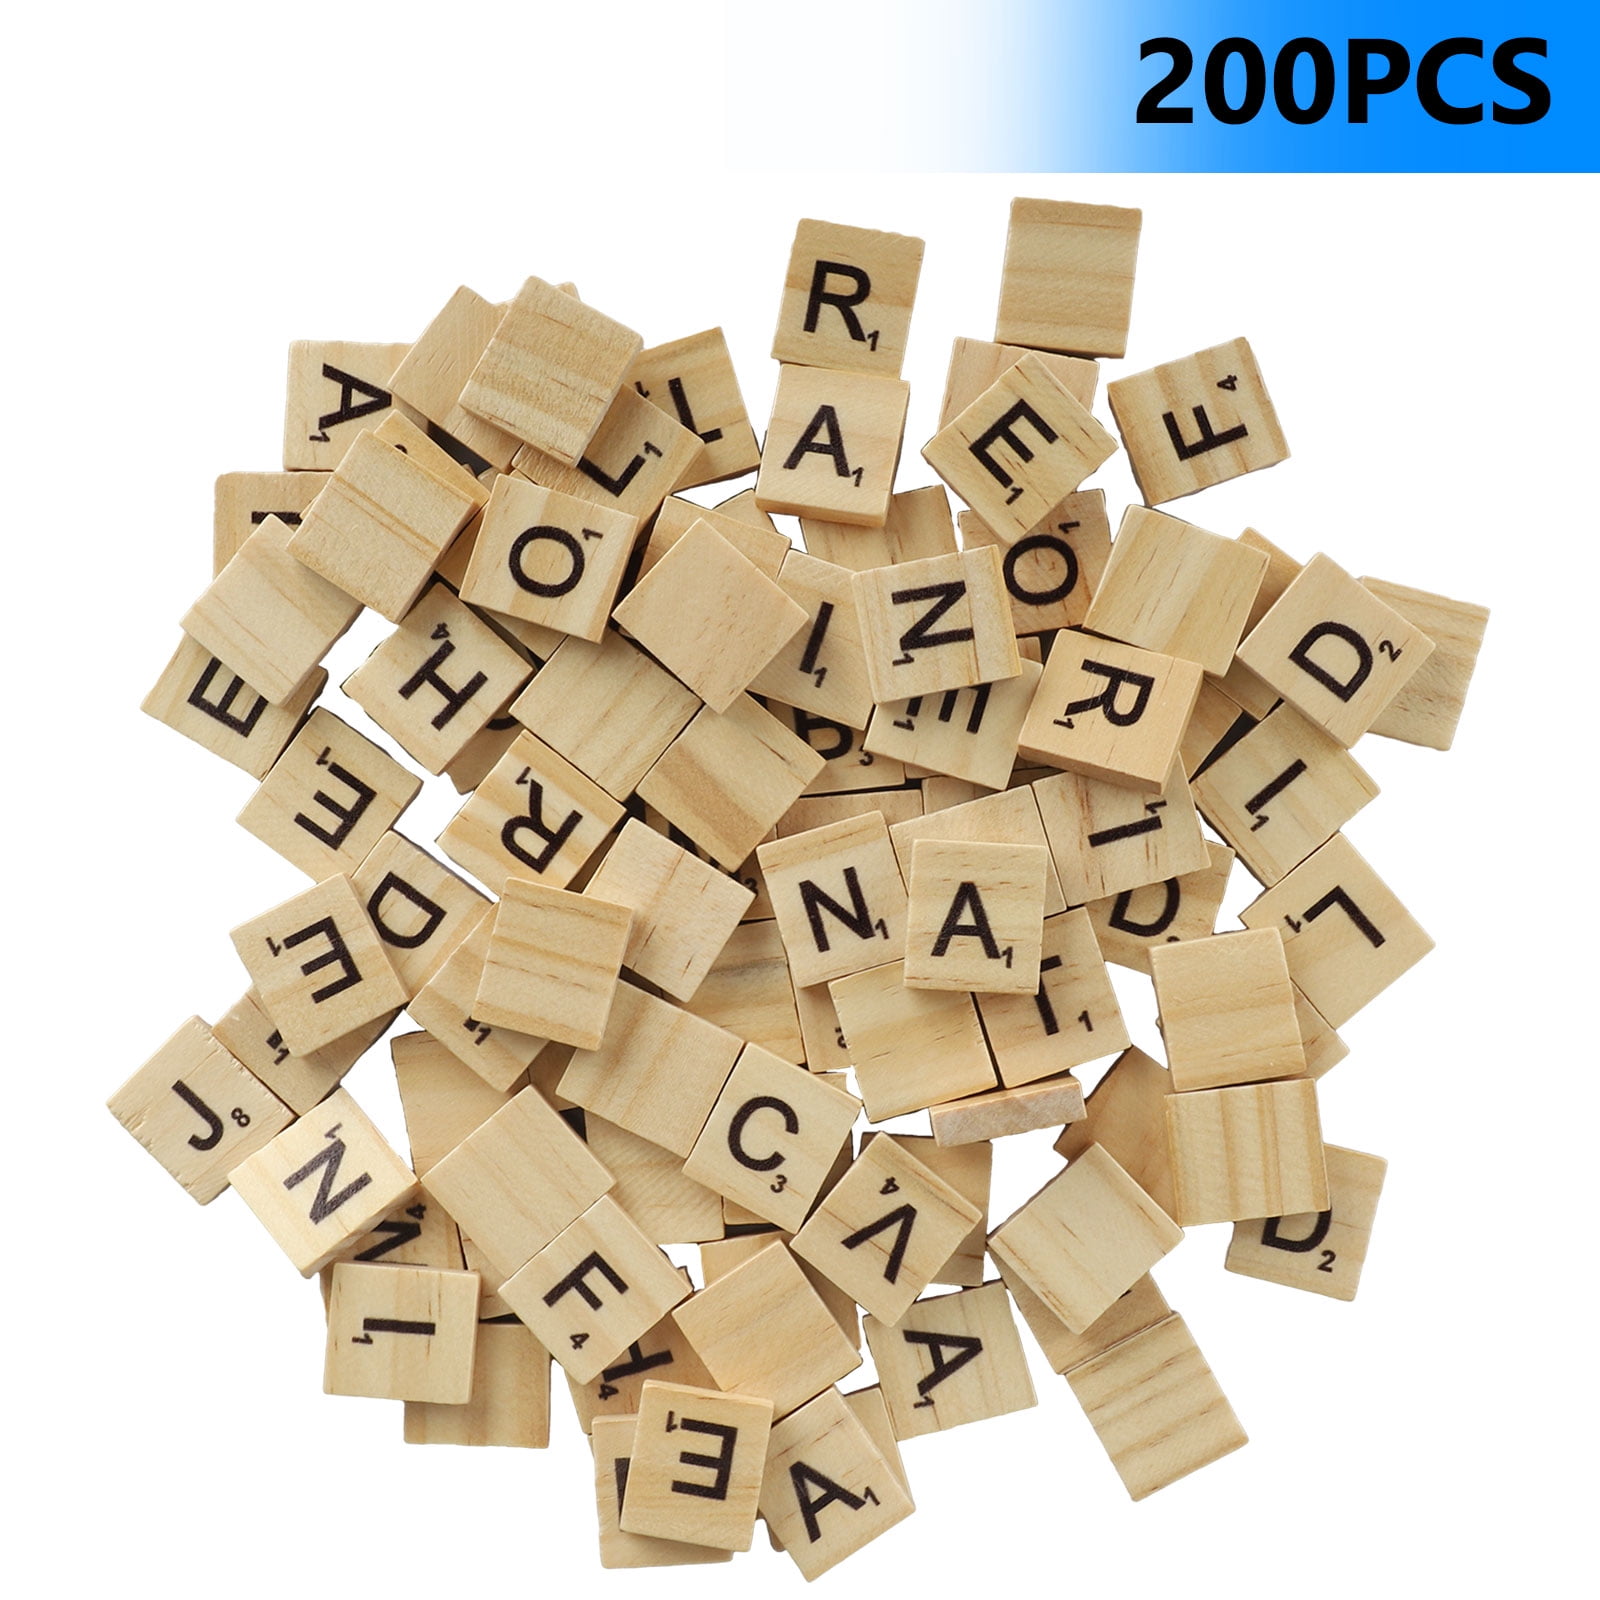 10 Scrabble Letter A Tiles for Replacement Tiles or for Crafts 